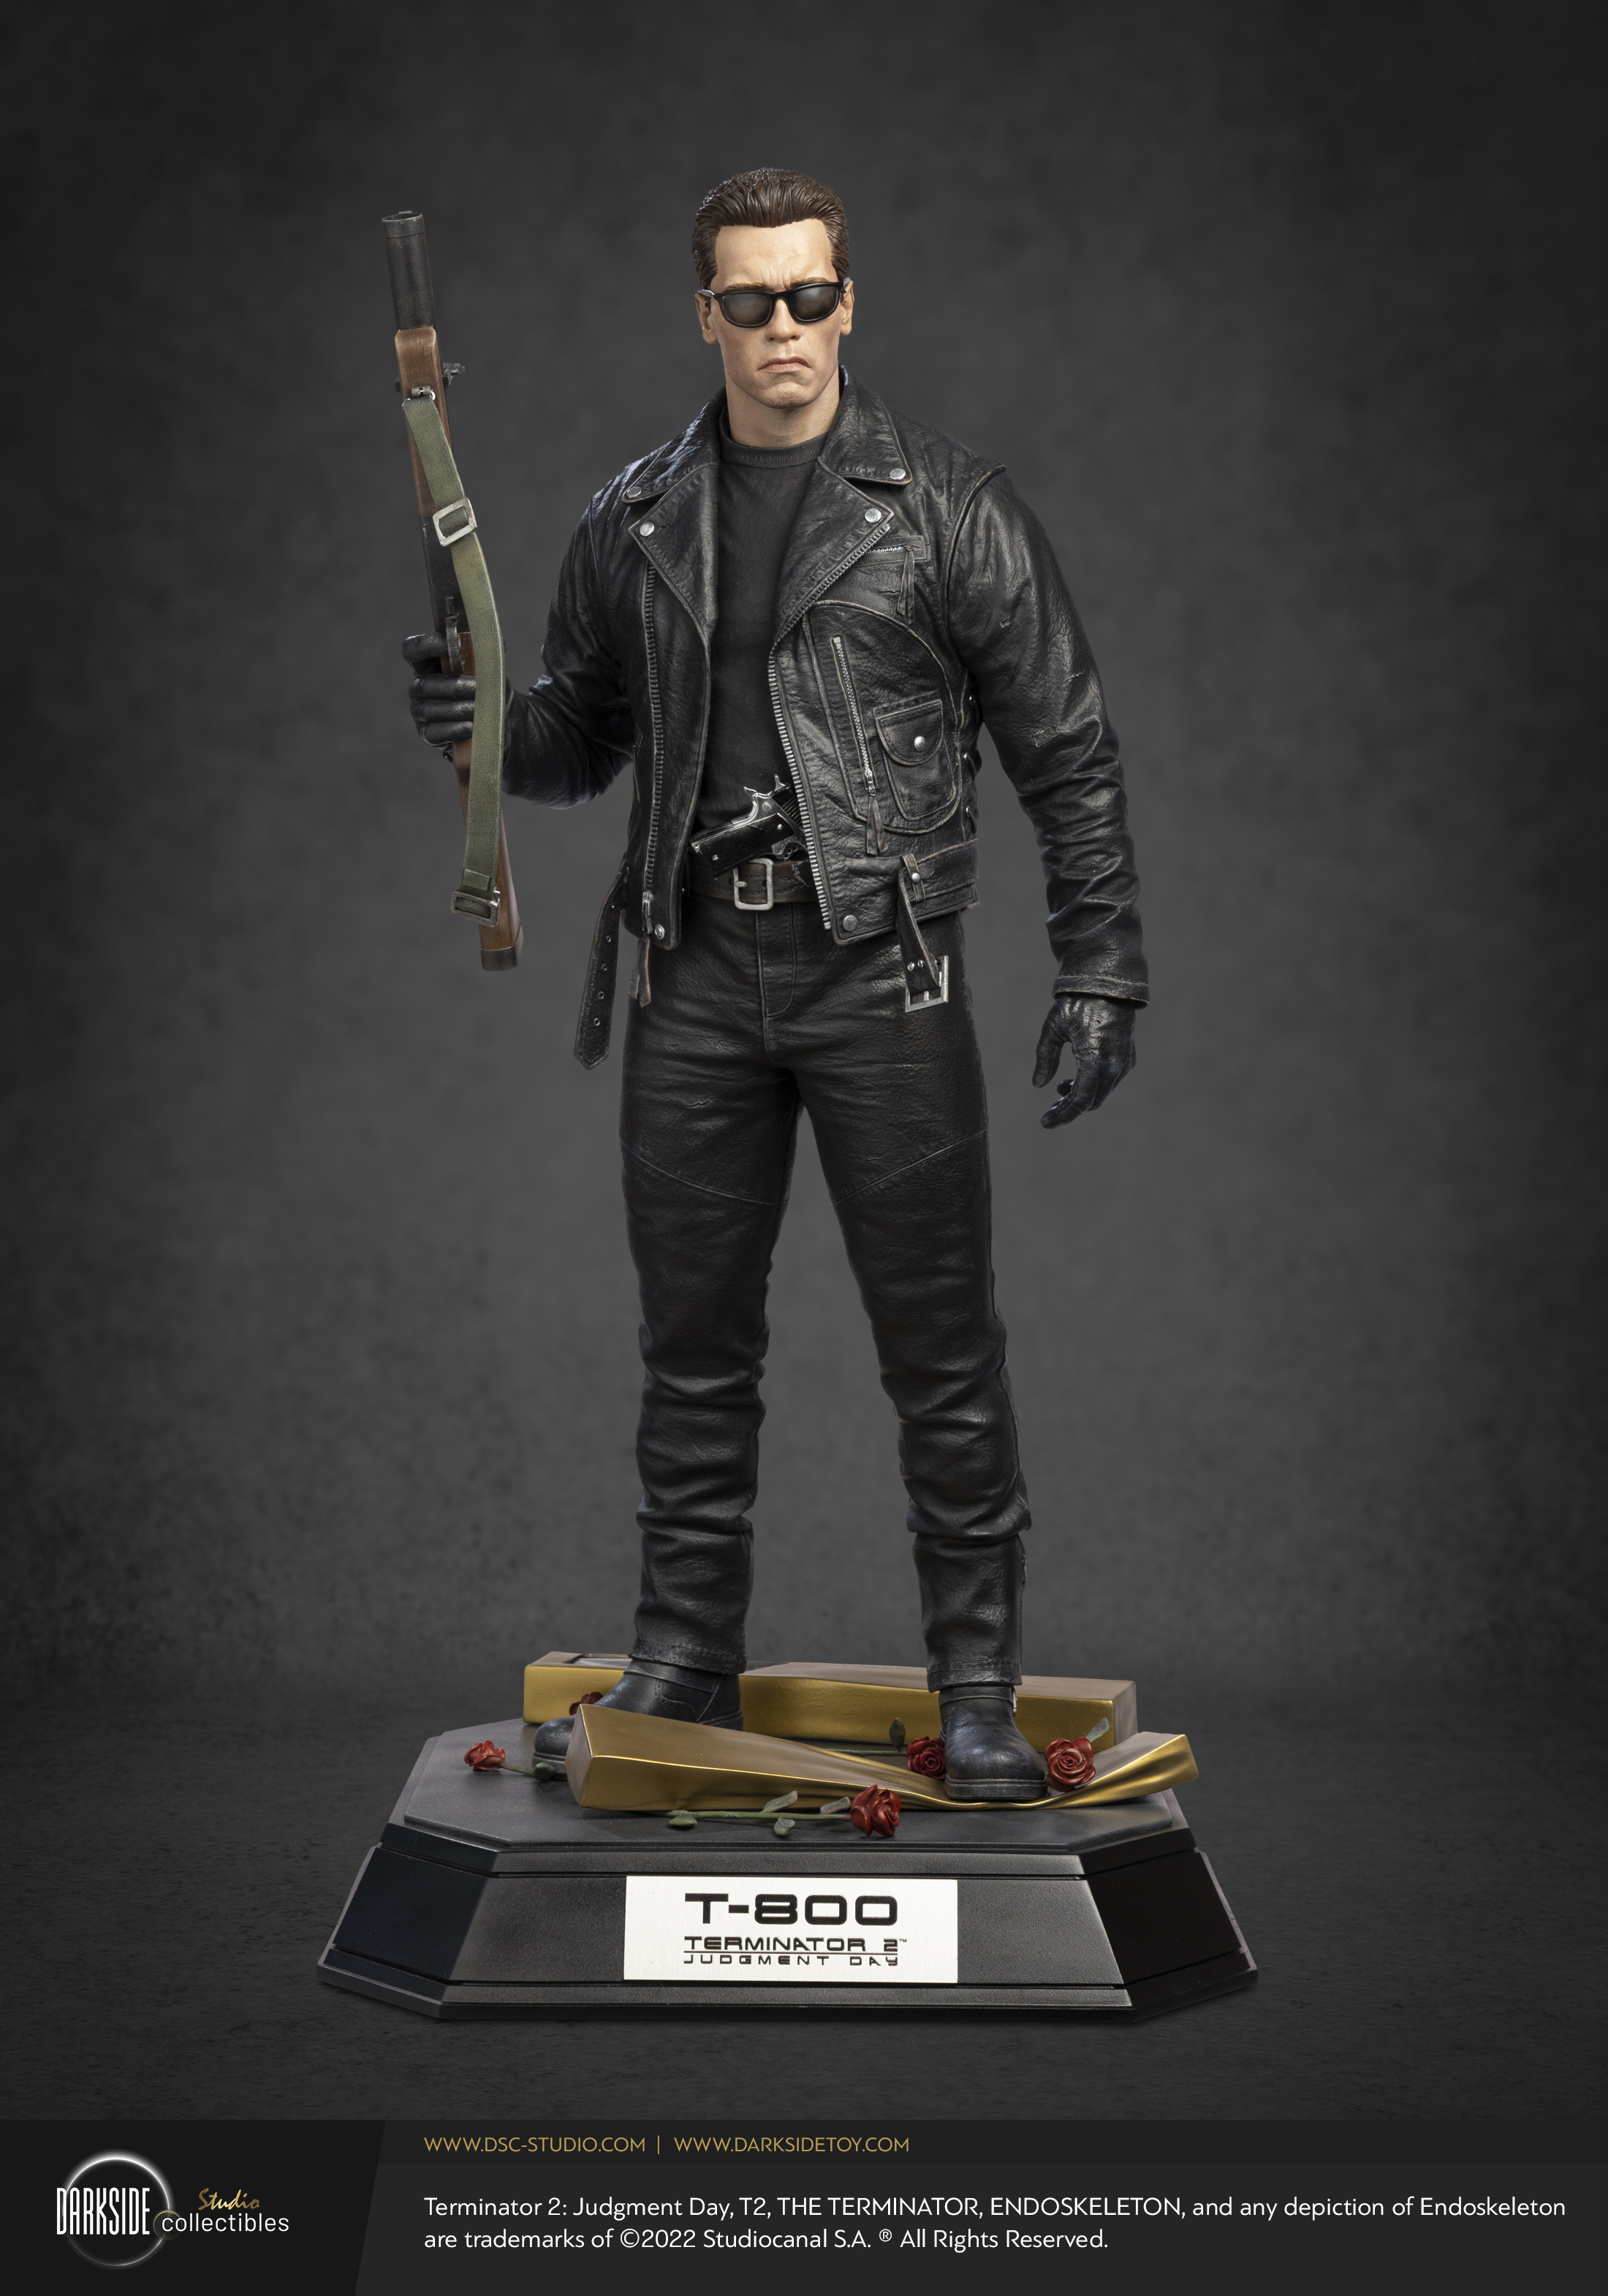 GREAT TWINS T-1000 DELUXE EDITION TERMINATOR 2 JUDGEMENT DAY T-800 1/12 Preorder 